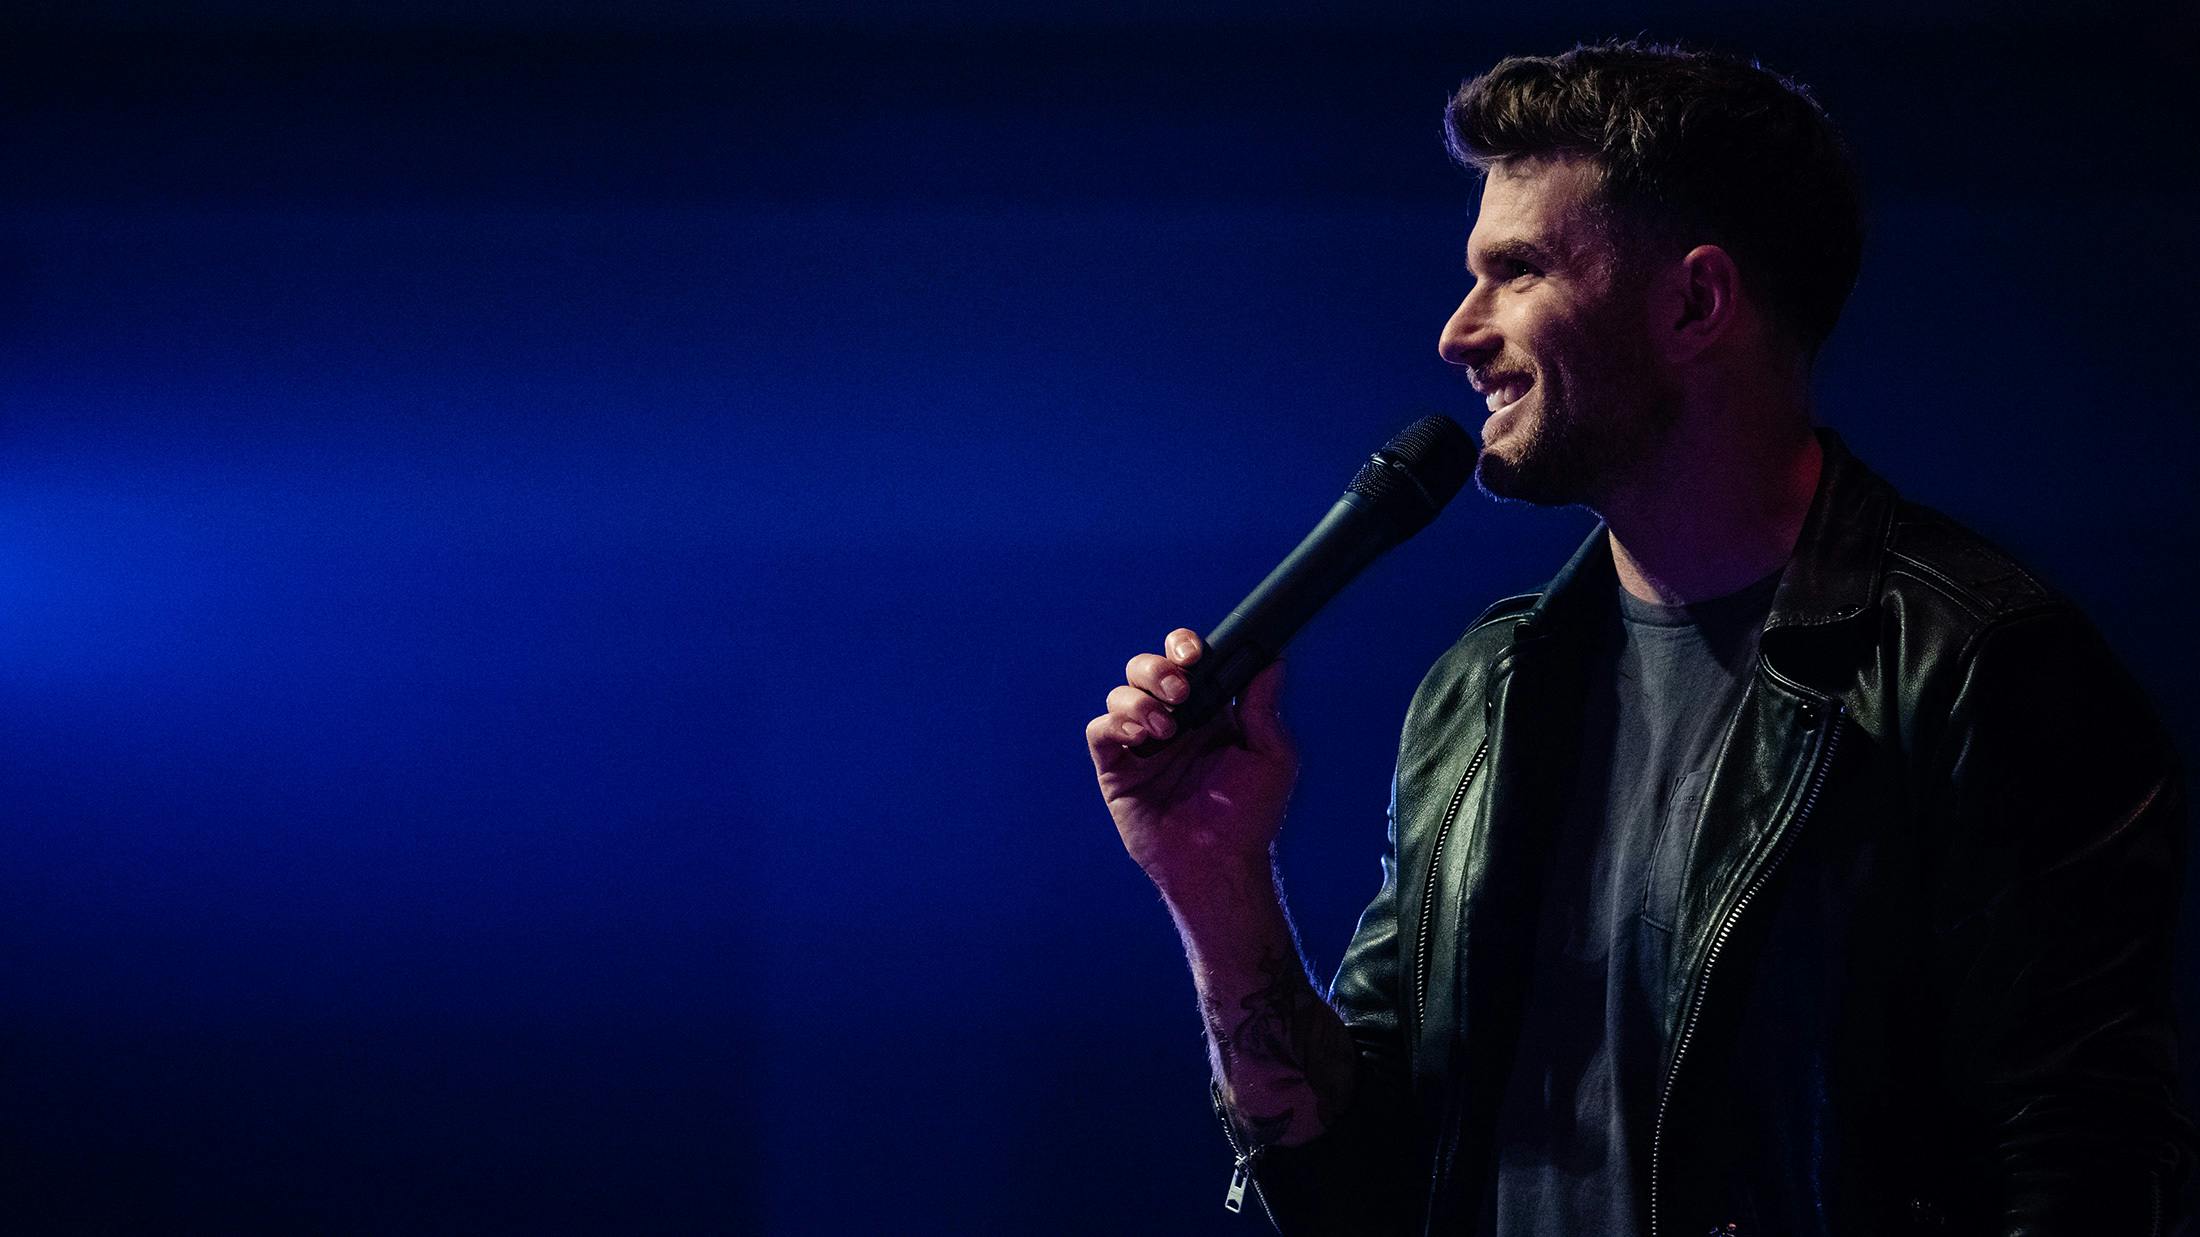 Joel Dommett: The 10 songs that changed my life